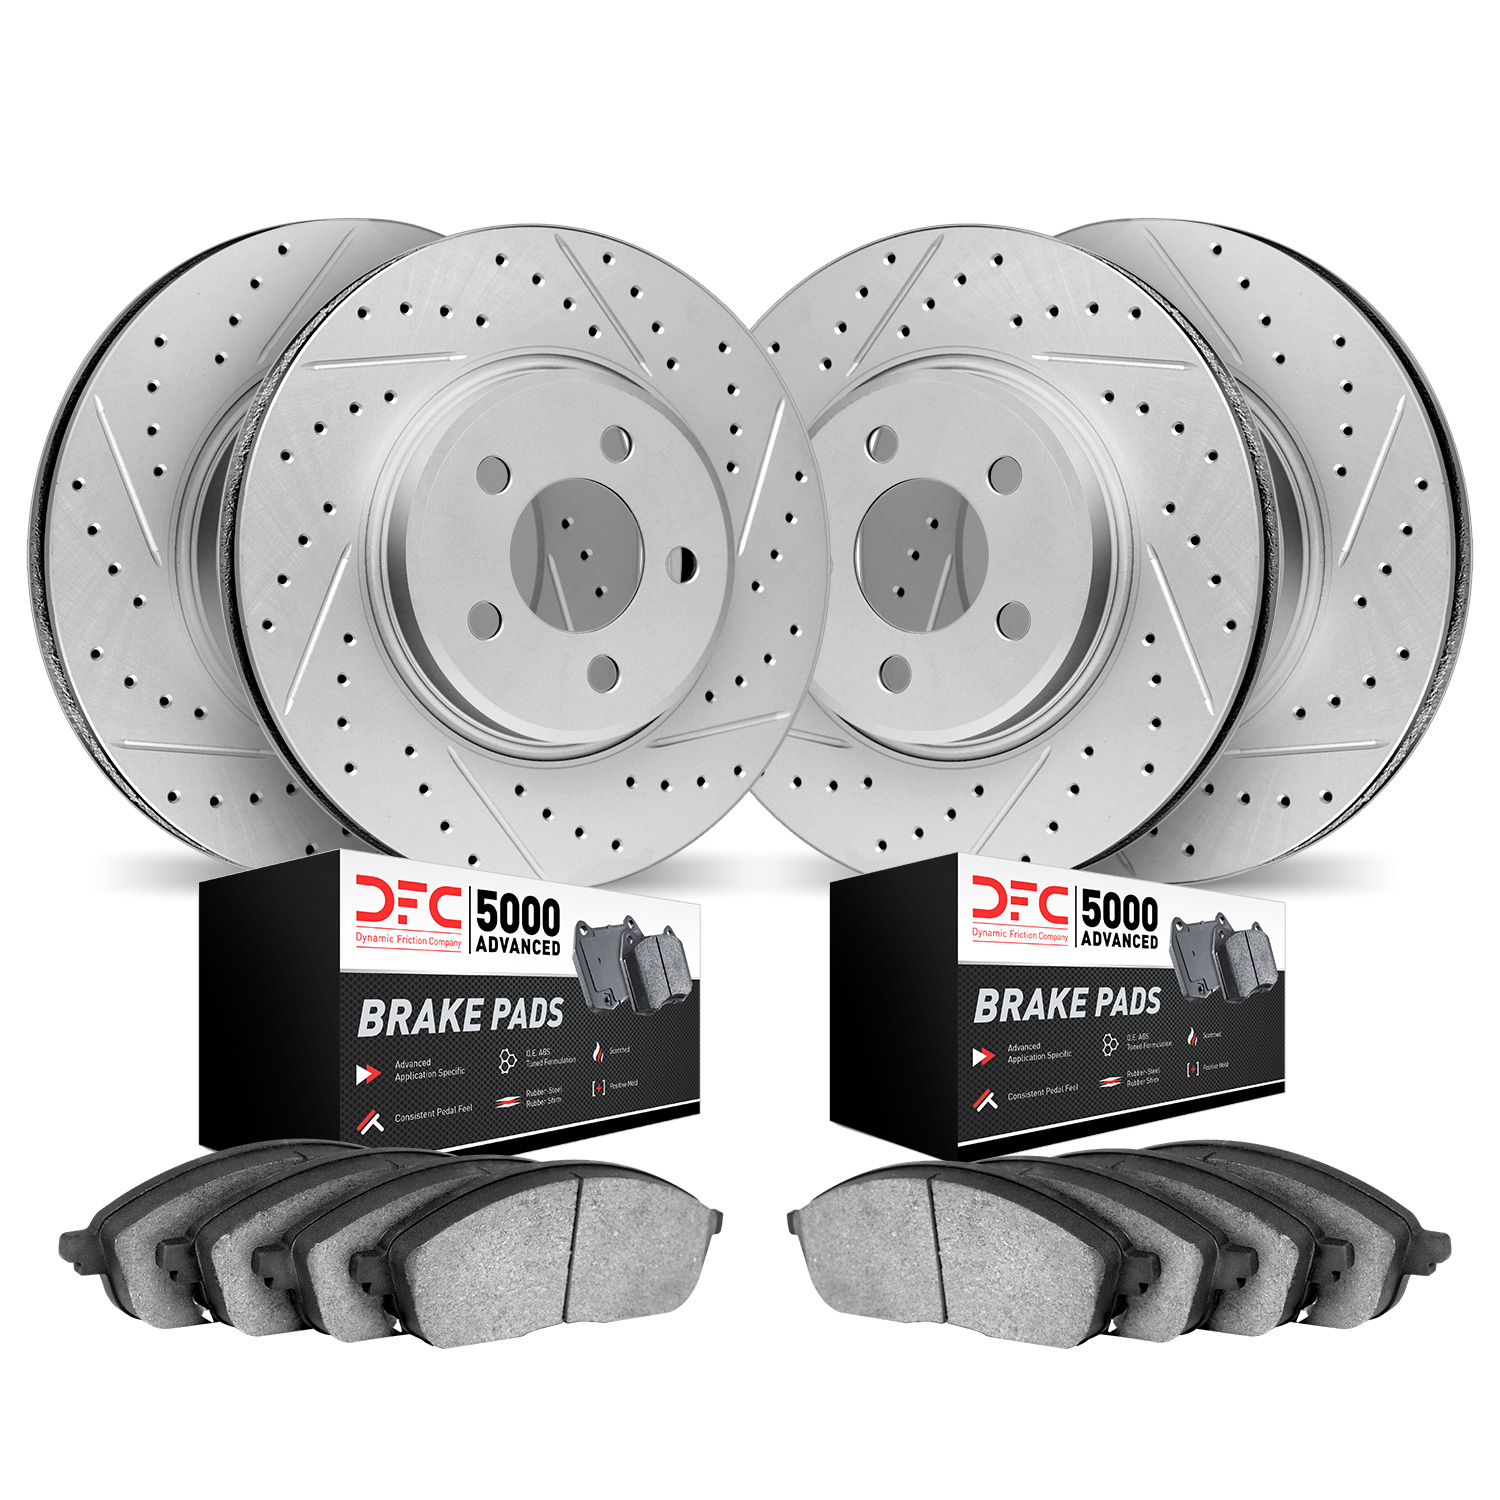 2504-63012 Geoperformance Drilled/Slotted Rotors w/5000 Advanced Brake Pads Kit, Fits Select Mercedes-Benz, Position: Front and